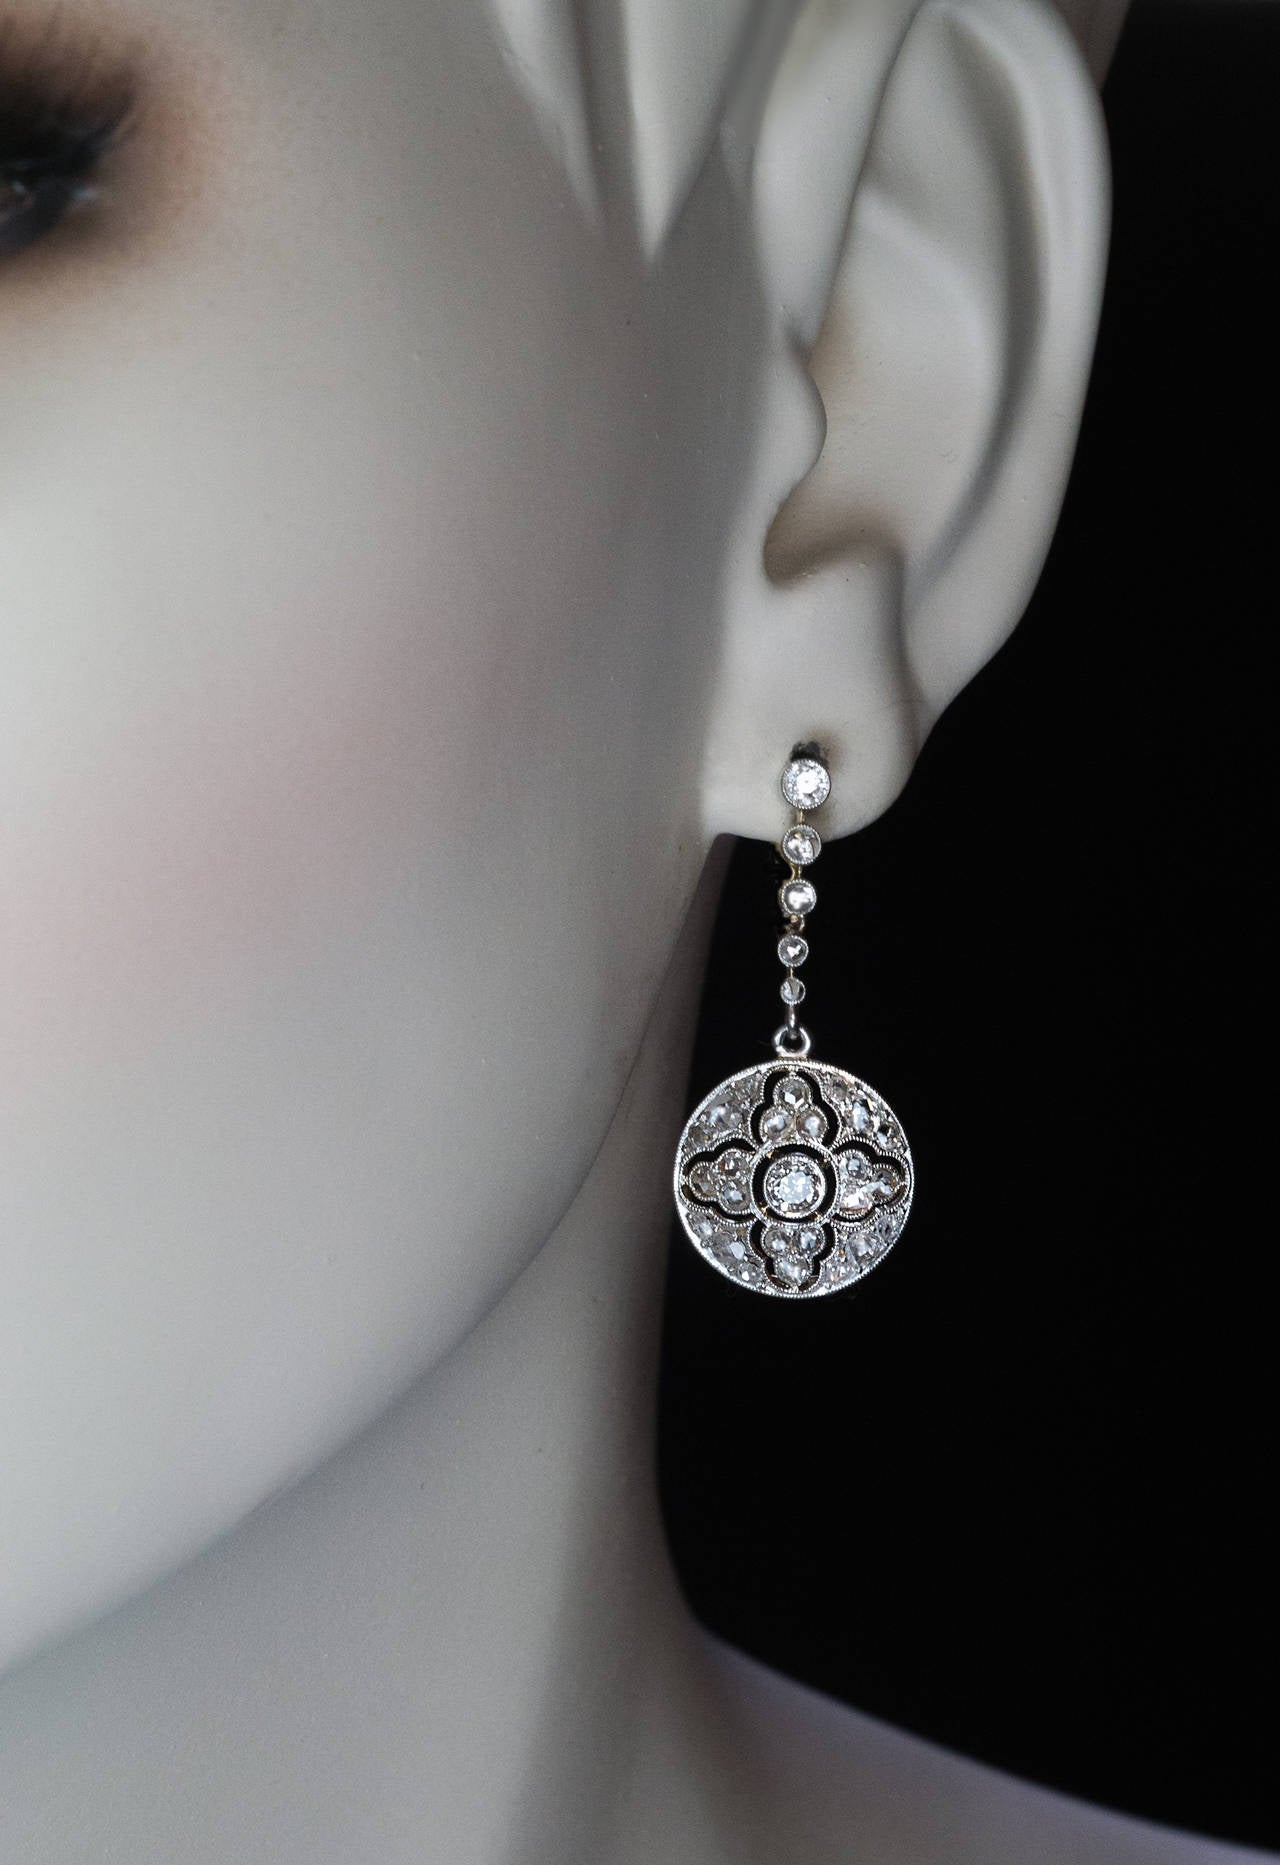 circa 1910

platinum topped gold earrings designed as openwork rosettes centered with old European cut diamonds surrounded by numerous old rose cut diamonds

estimated total diamond weight 1.20 ct

total length 33 mm (1 3/8 in.)

diameter 15